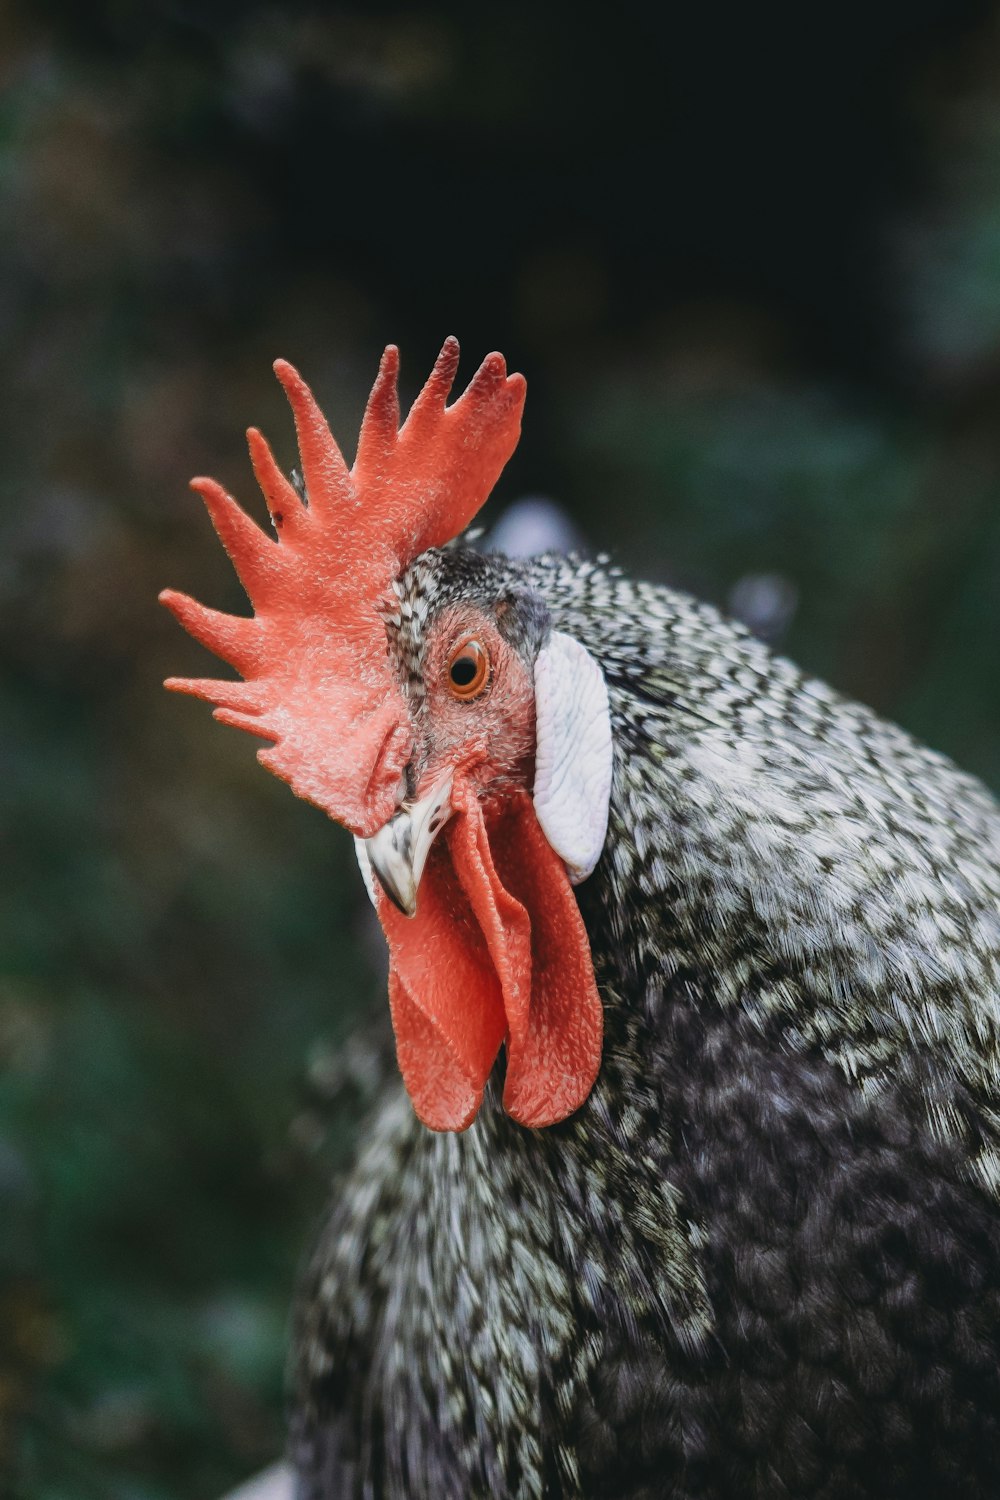 a black and white chicken with a red comb